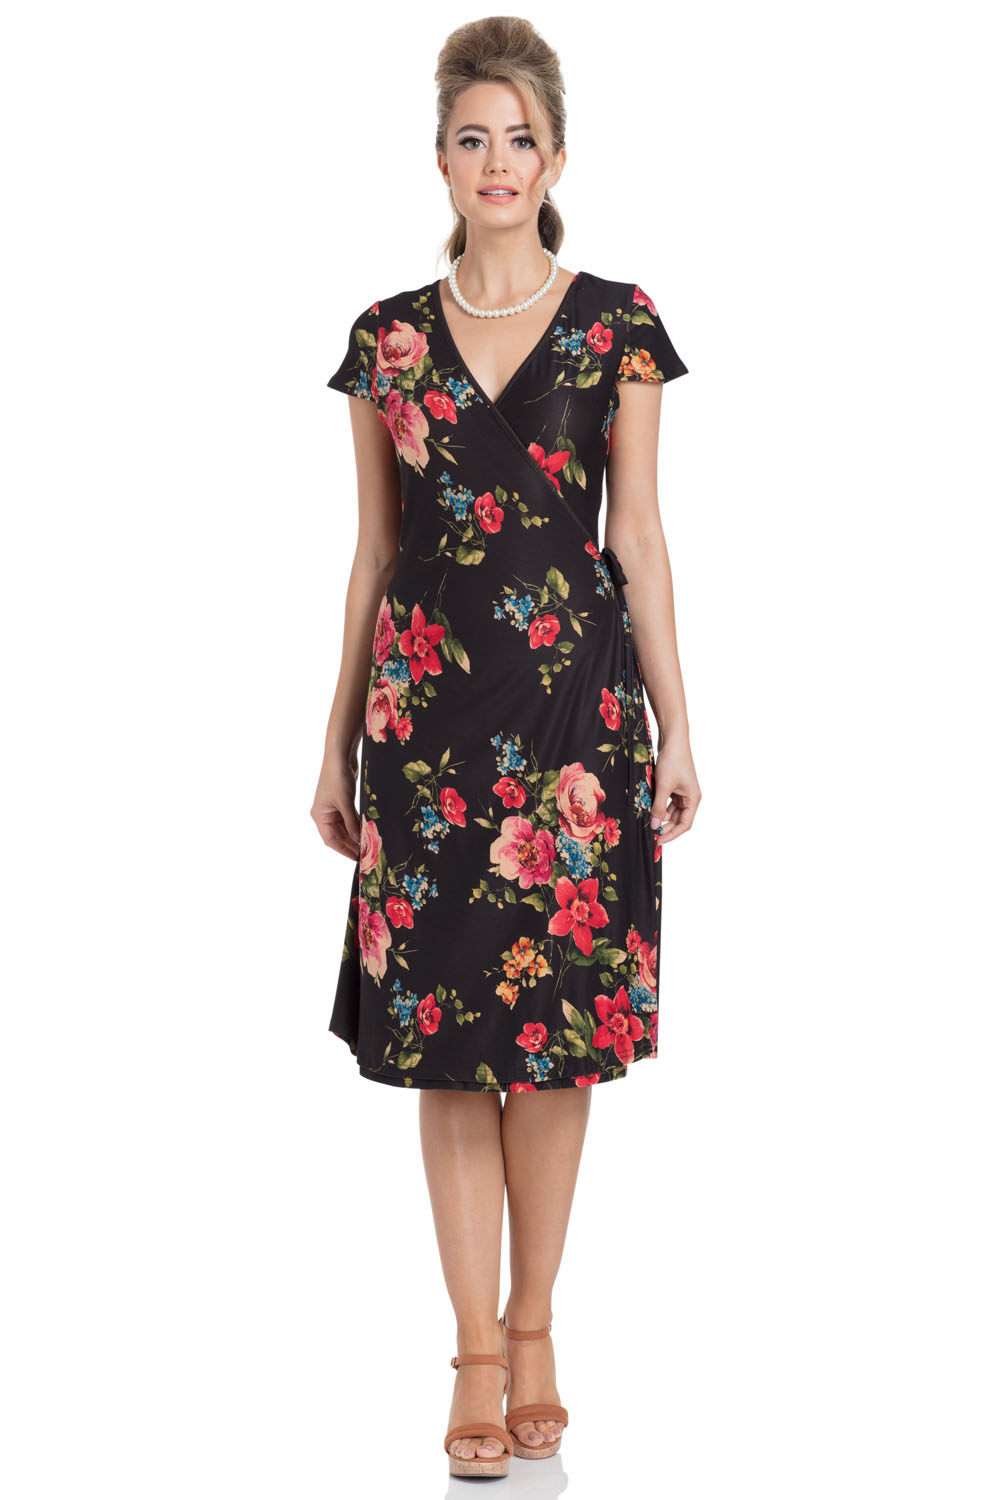 Sophia Floral Wrap Flare Dress | Vintage Inspired Fashion & Accessories ...